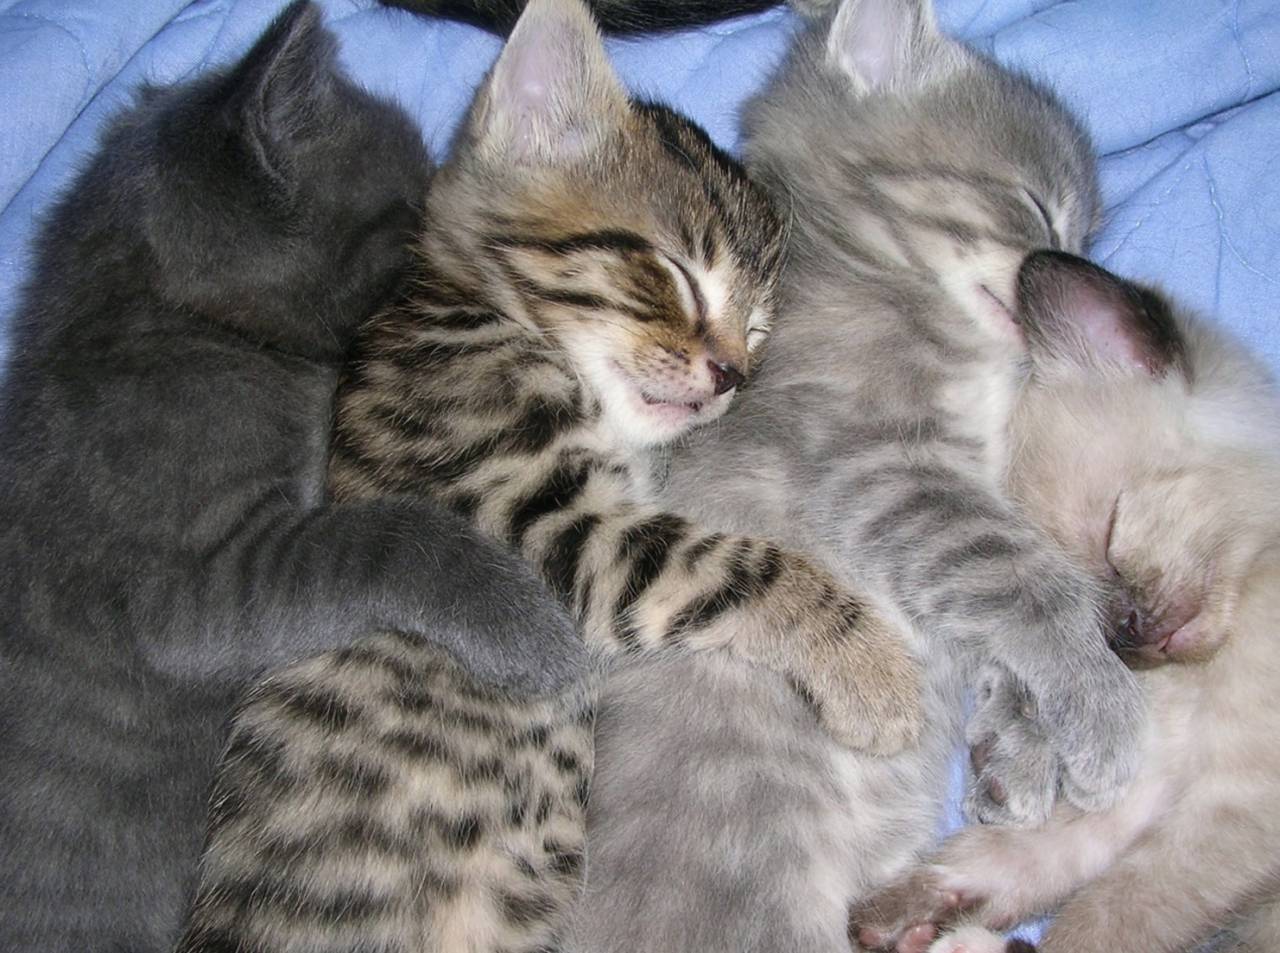 By Eli Duke - kittens spooning, CC BY-SA 2.0, https://commons.wikimedia.org/w/index.php?curid=11830949